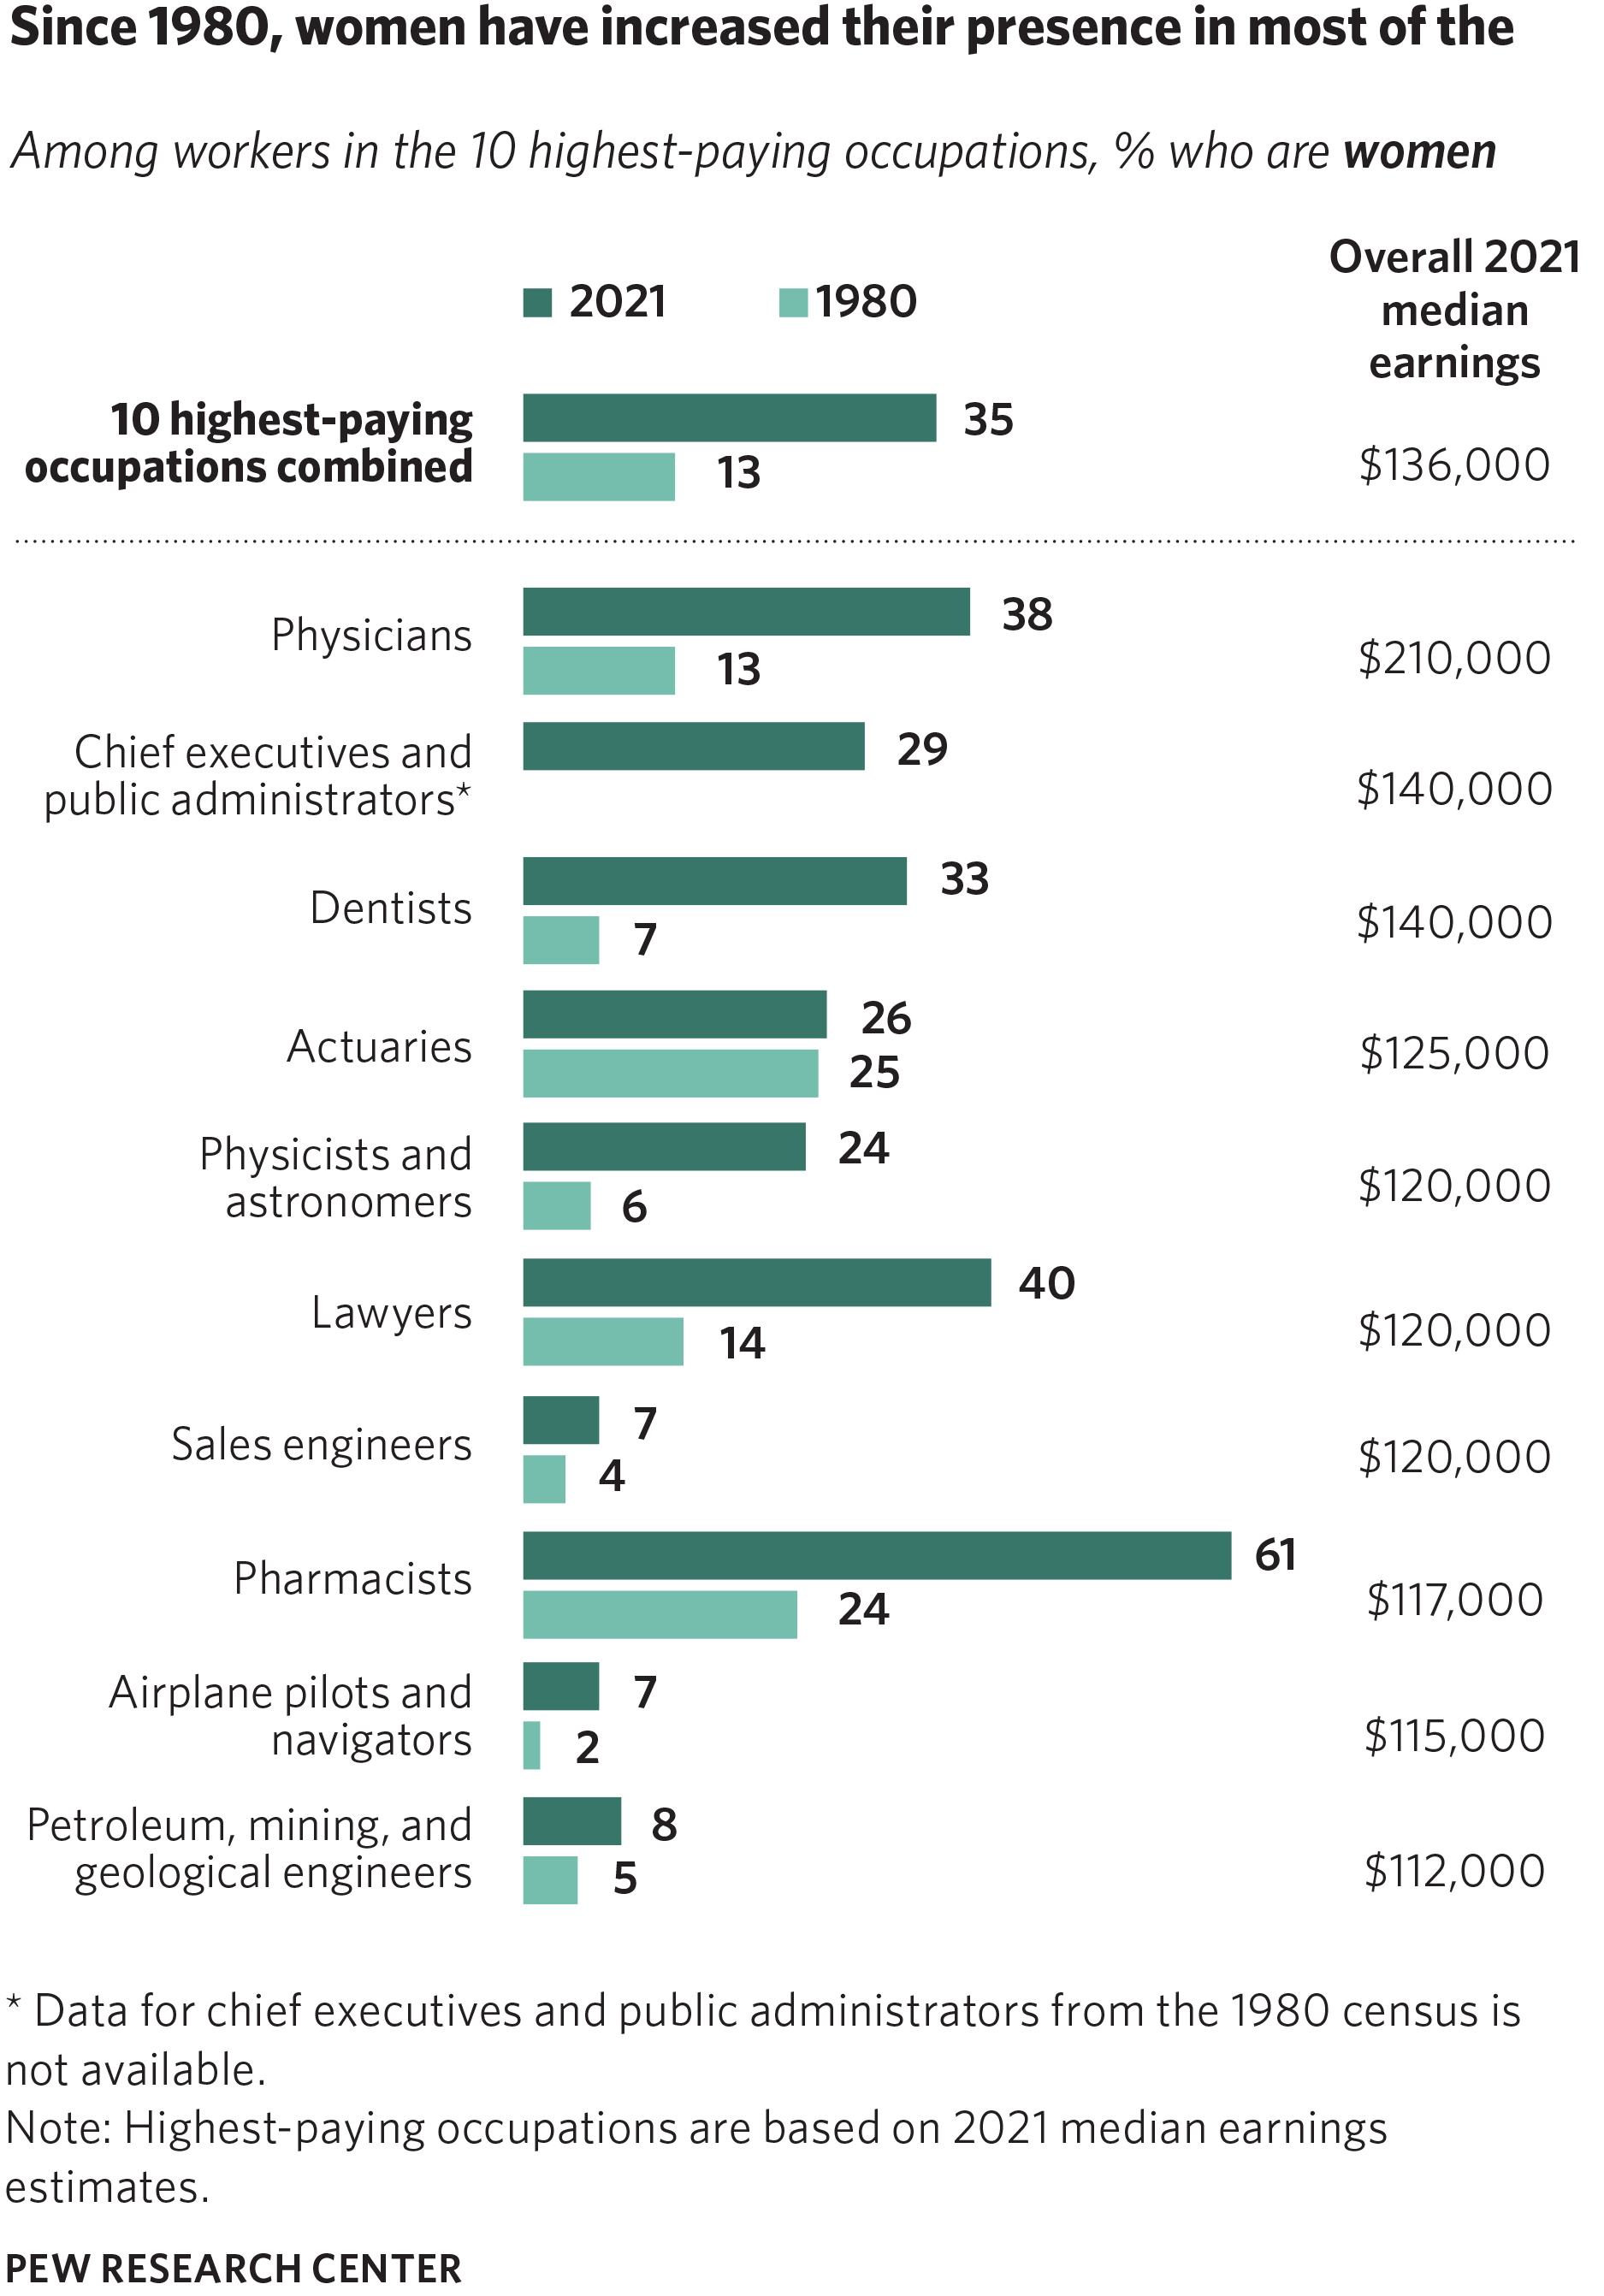 Since 1980, women have increased their presence in most of the 10 highest-paying occupations in the U.S. Among workers in the 10 highest-paying occupations, % who are women